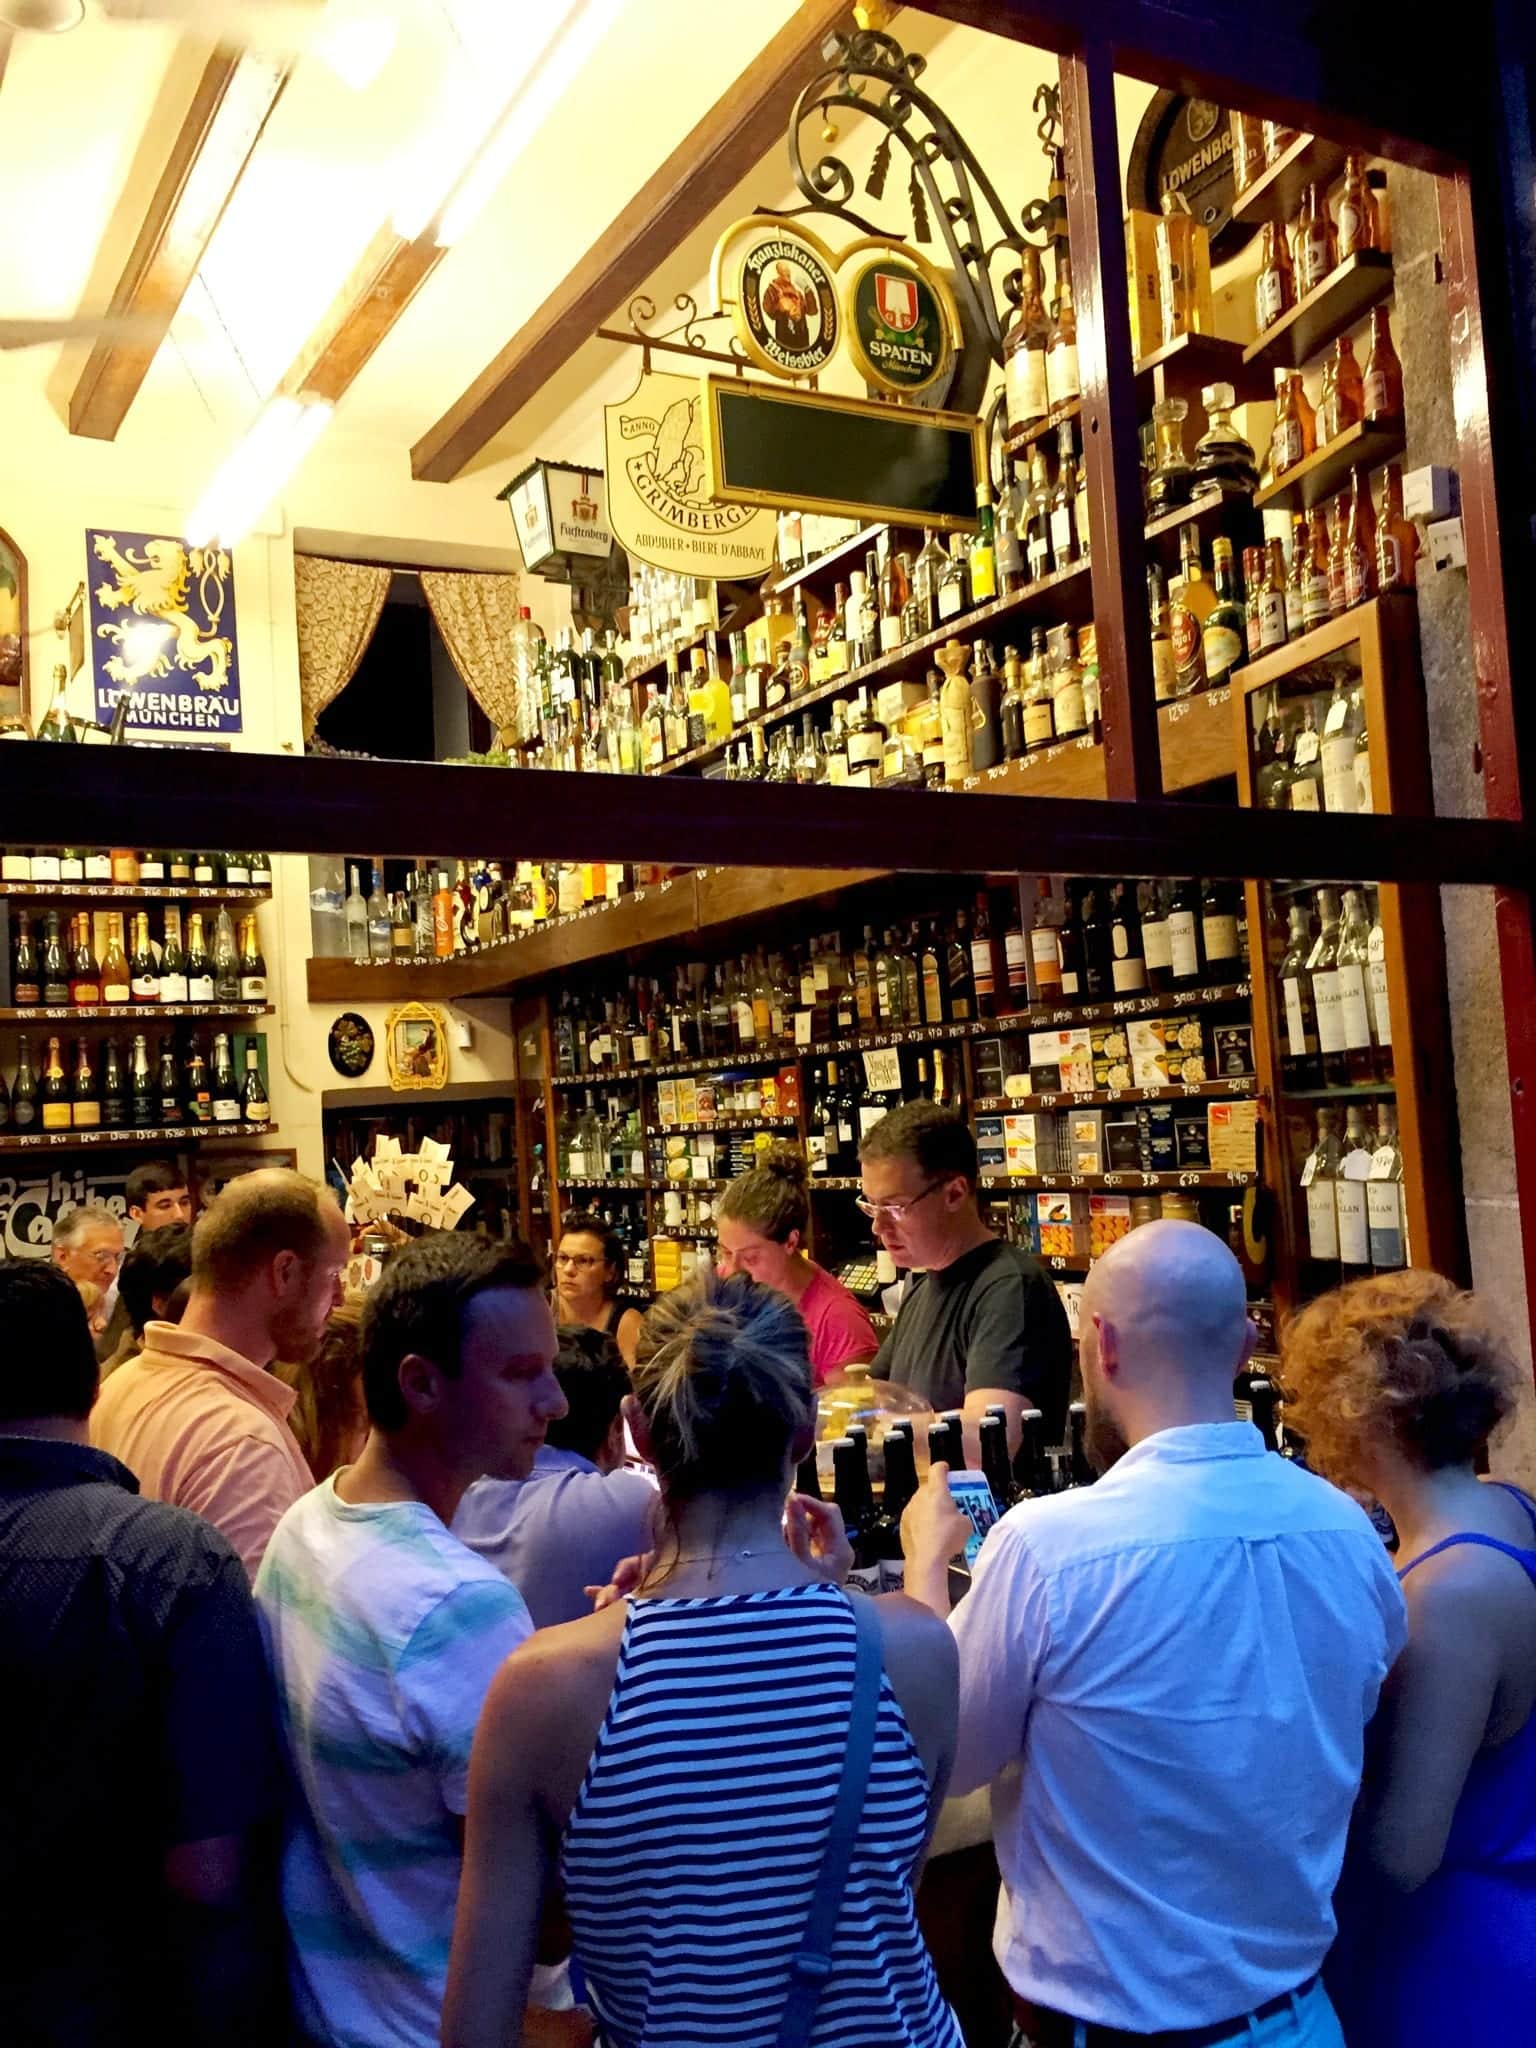 People gathered around a bar in Barcelona, with two walls lined with bottles of liquor